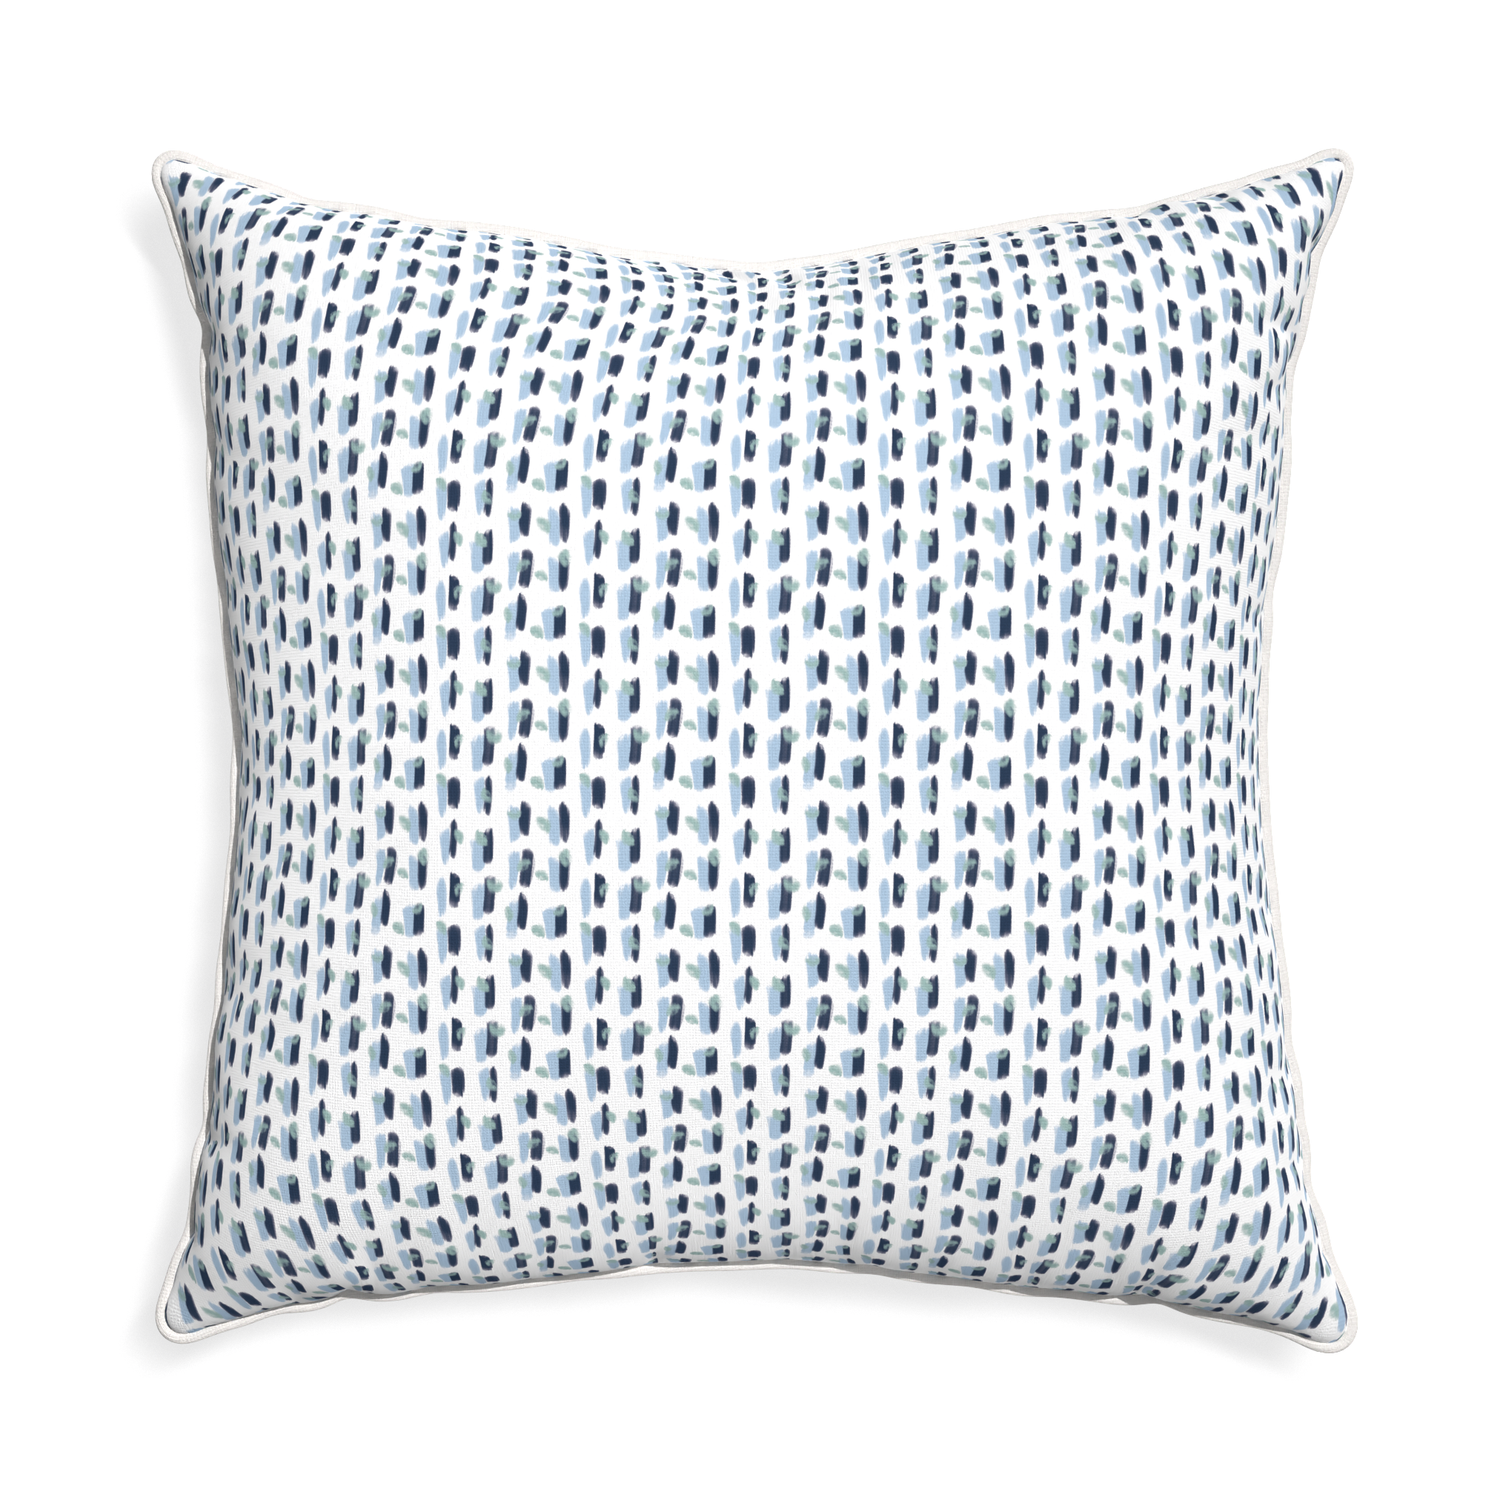 Euro-sham poppy blue custom pillow with snow piping on white background